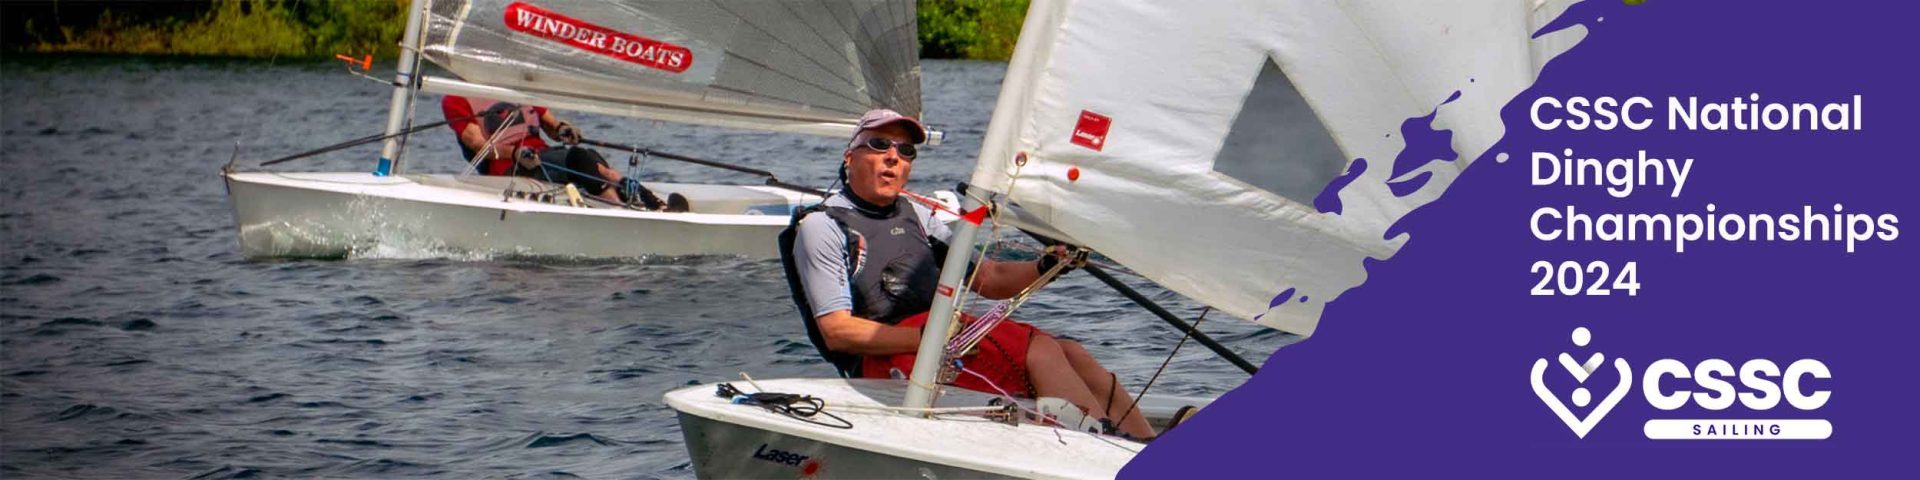 CSSC national dinghy championships 2024